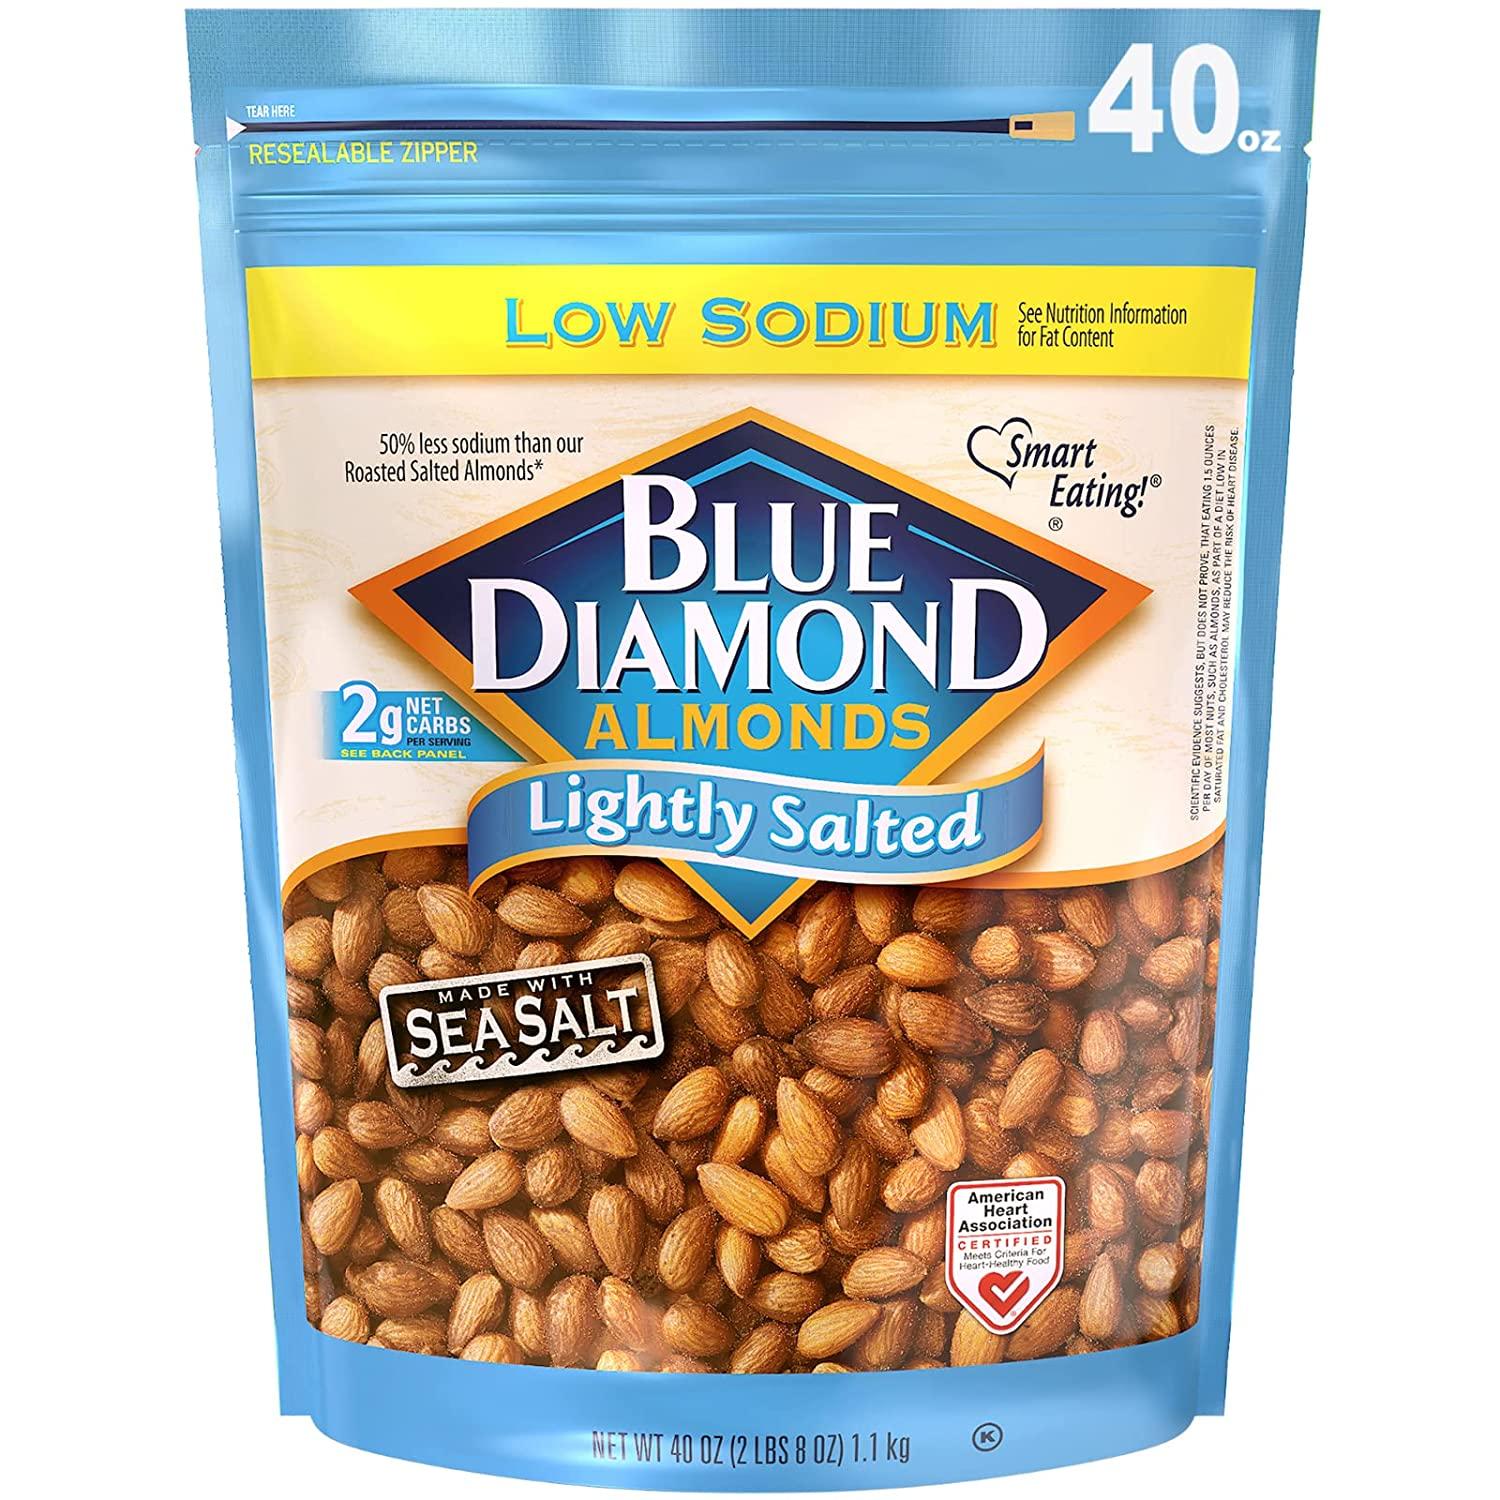 Blue Diamond Almonds Low Sodium Lightly Salted for $9.98 Shipped